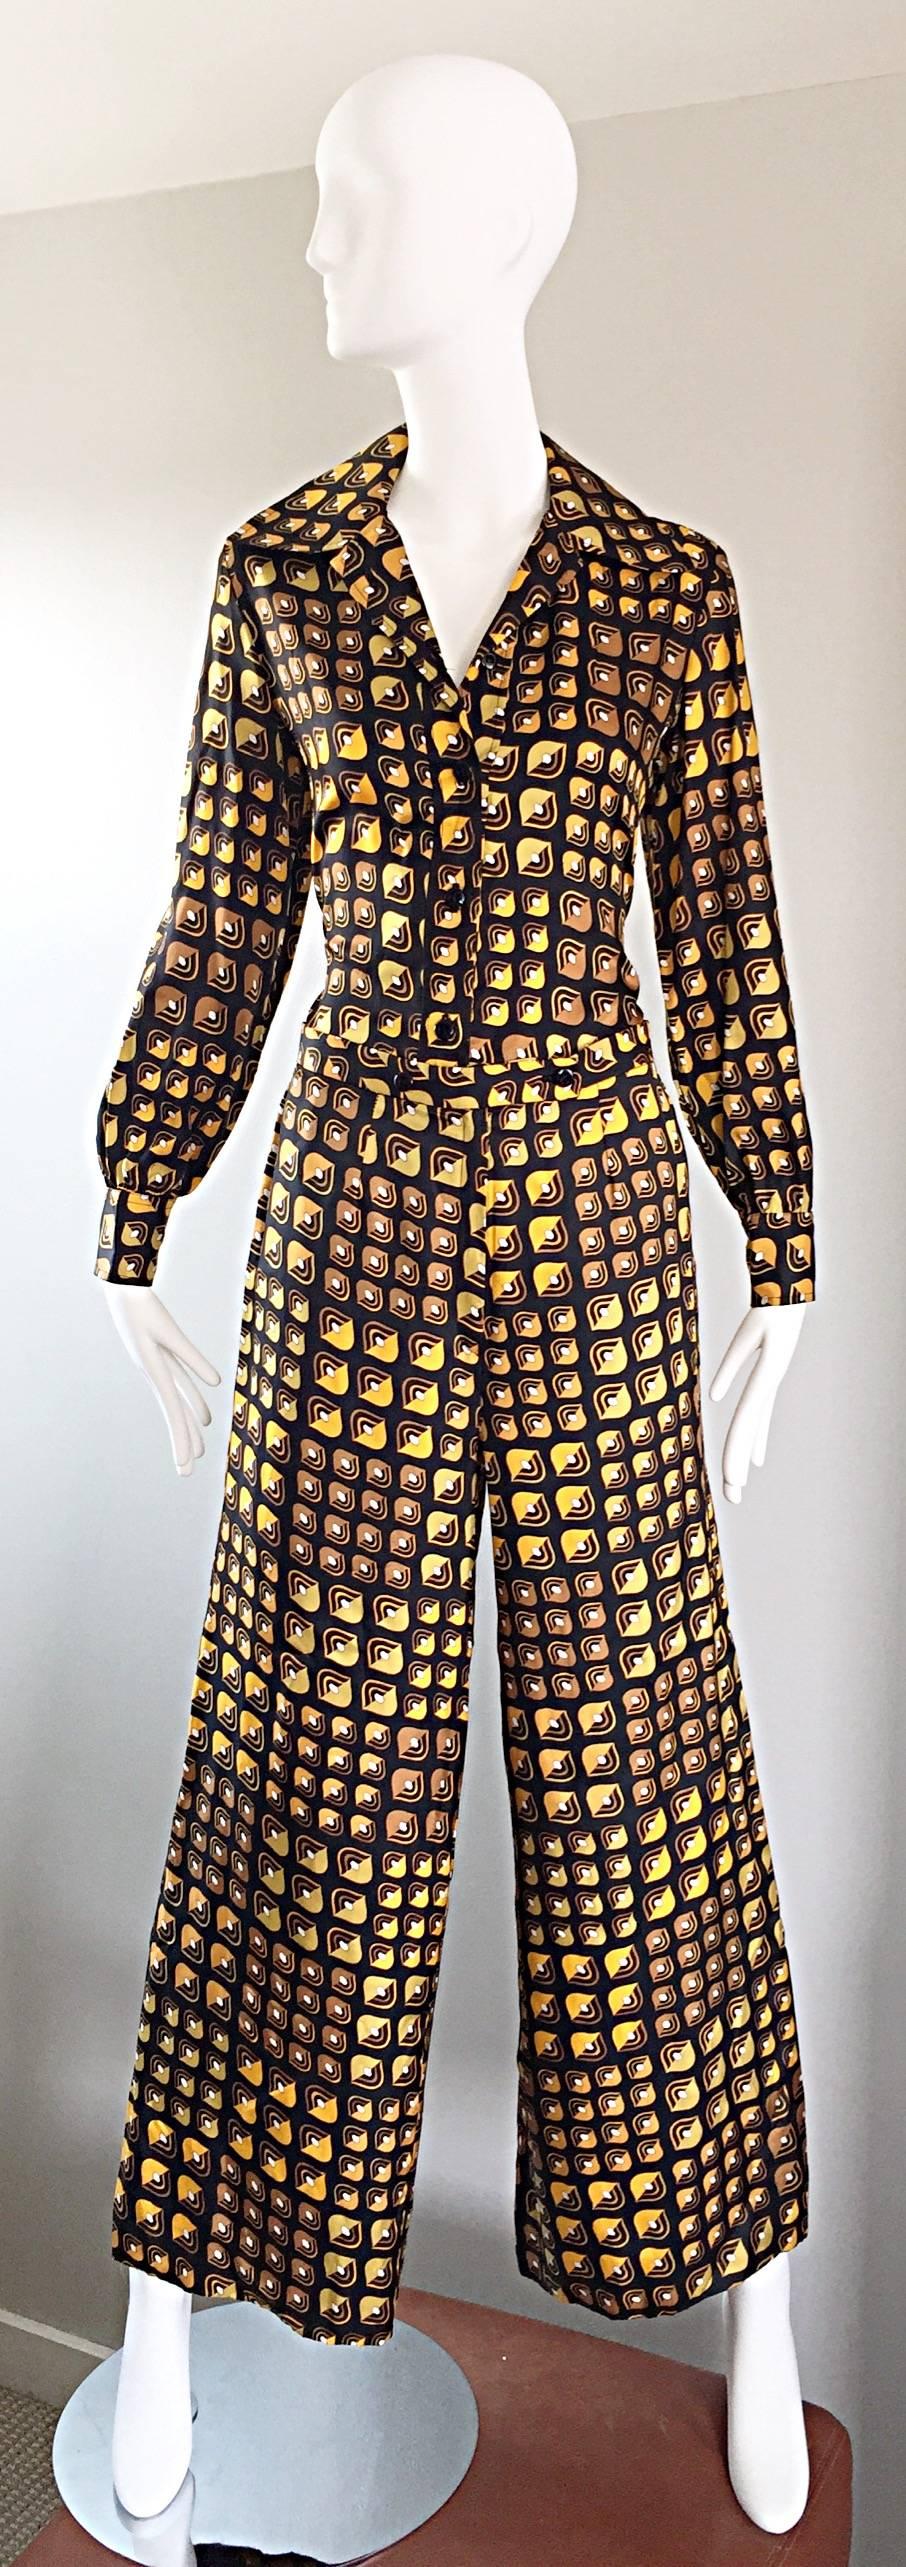 Lanvin Vintage Silk Blouse and Flared Trousers Geometric Yellow Print Rare 1970s 5